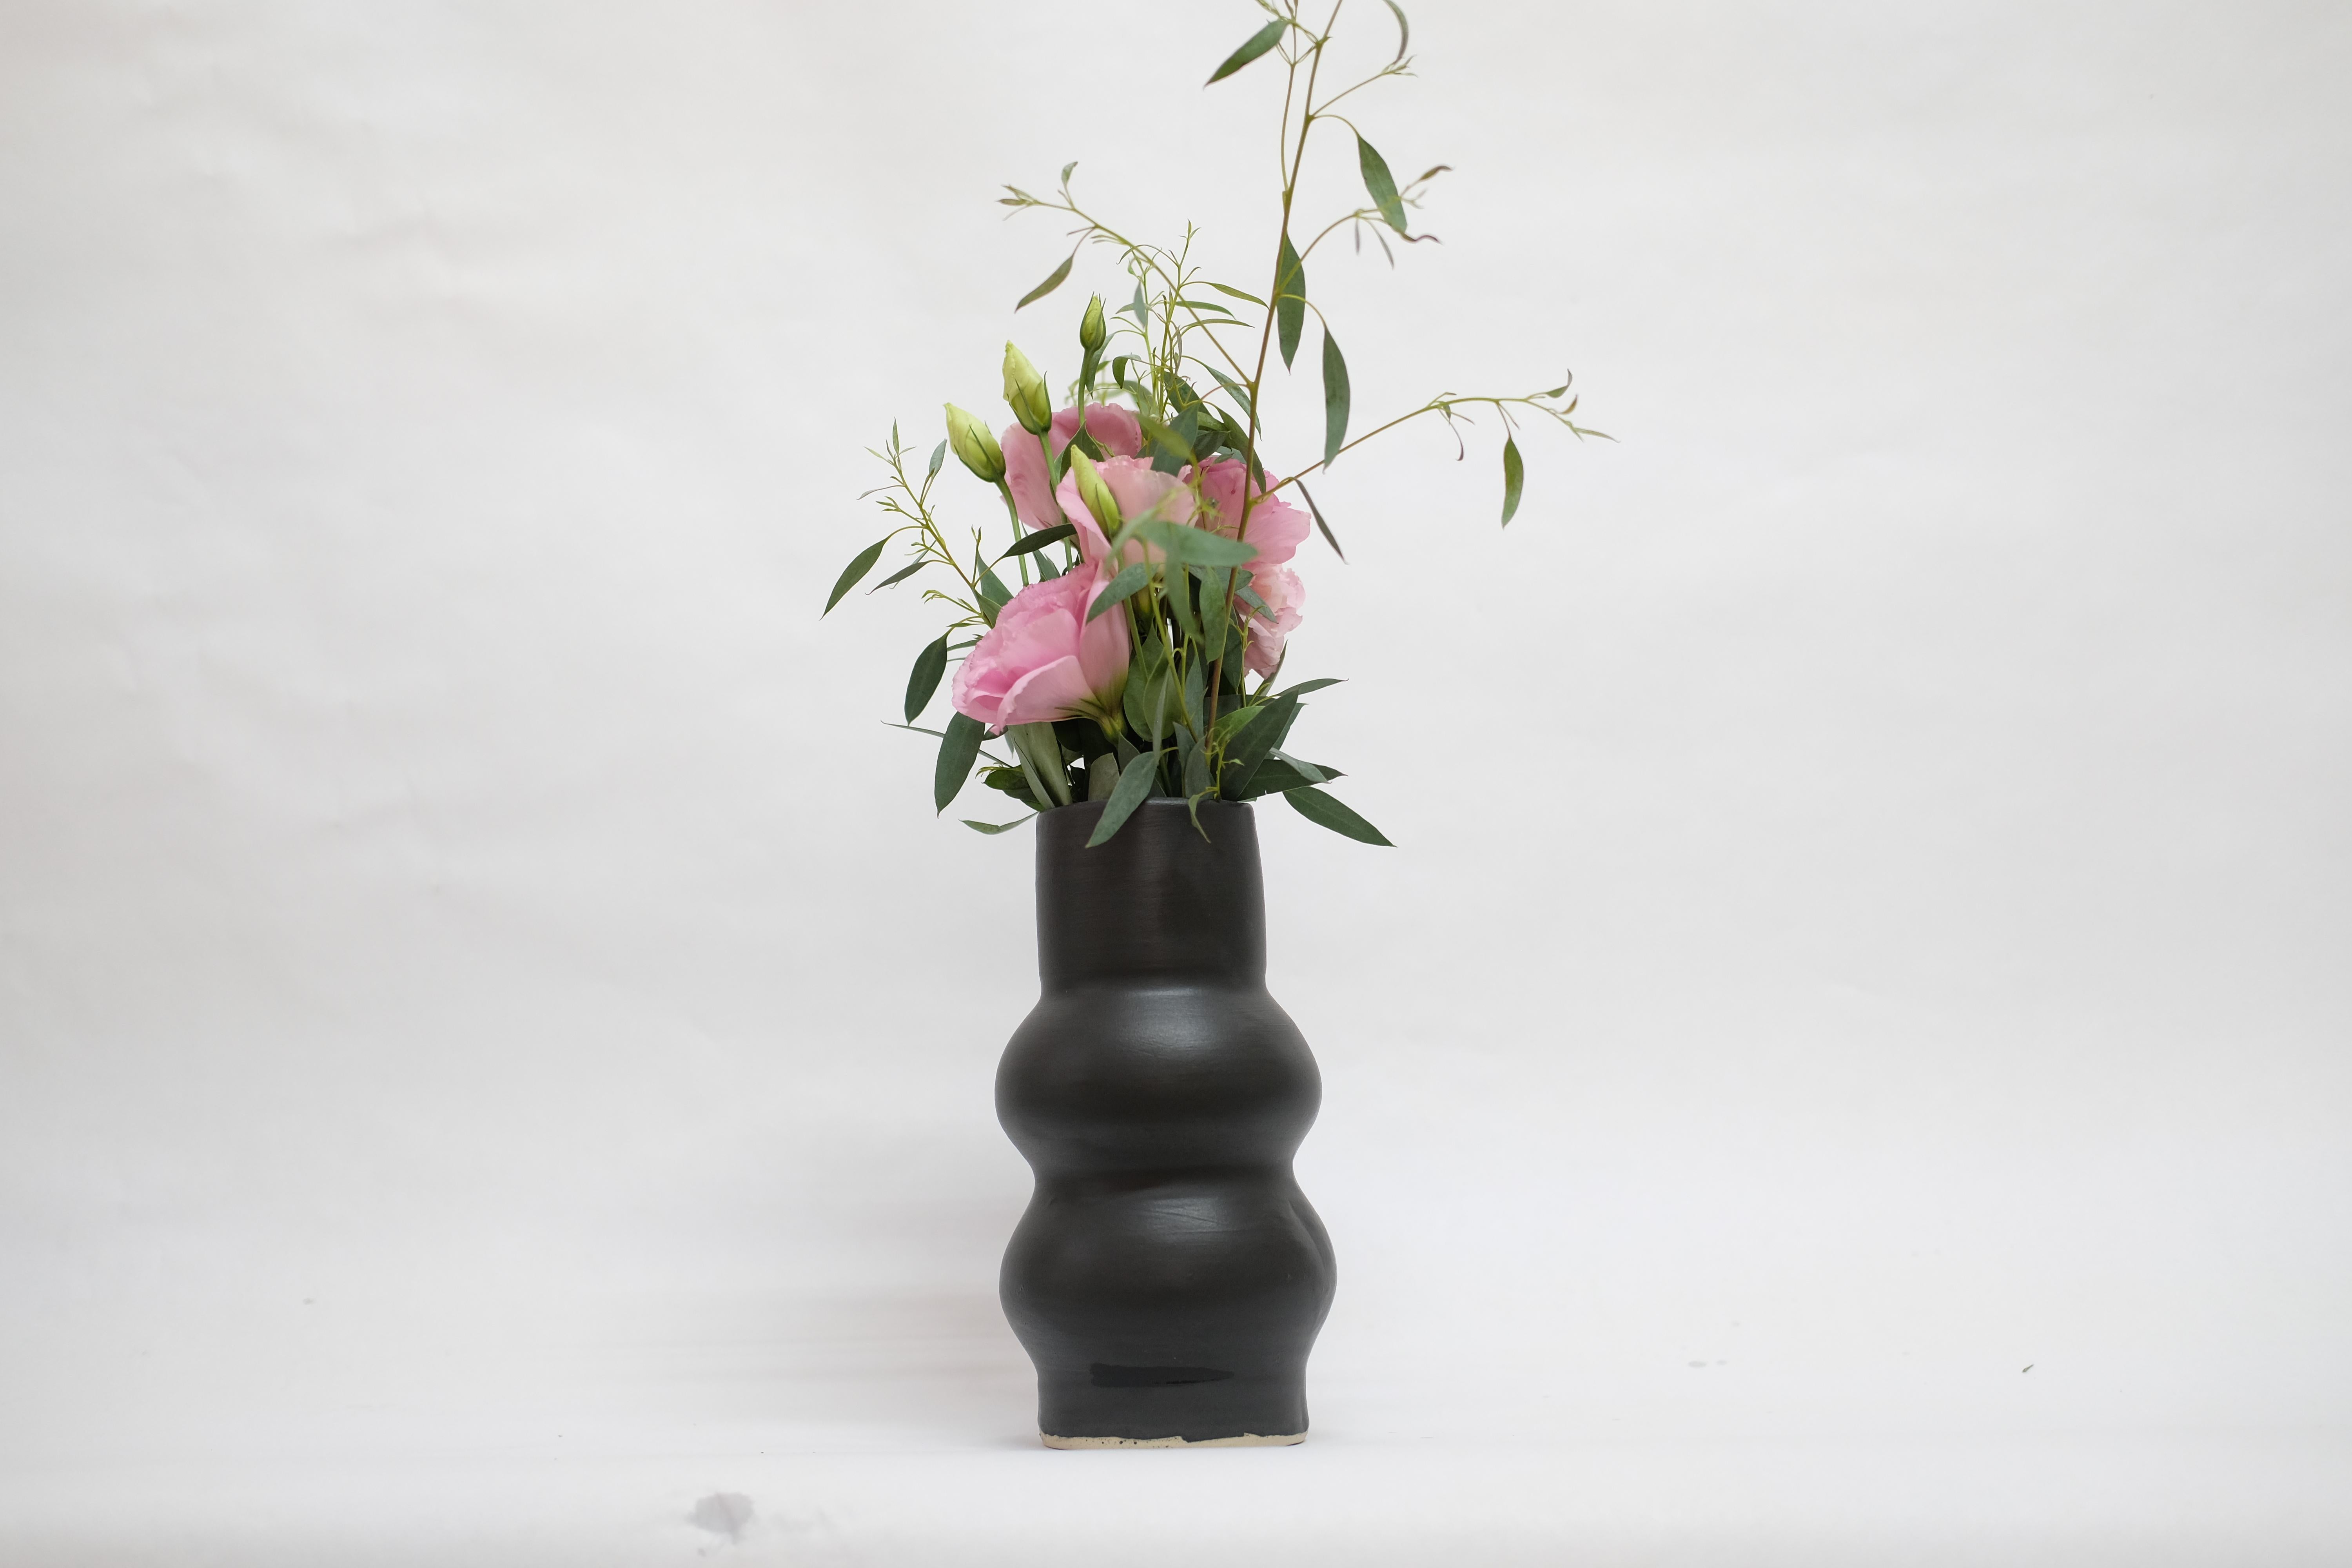 Femme II unique stoneware vase by Camila Apaez
Unique 
Materials: Stoneware
Dimensions: 8 x 8 x 22 cm

This year has been shaped by the topographies of our homes and the uncertainty of our time. We have found solace in the humbleness of silence